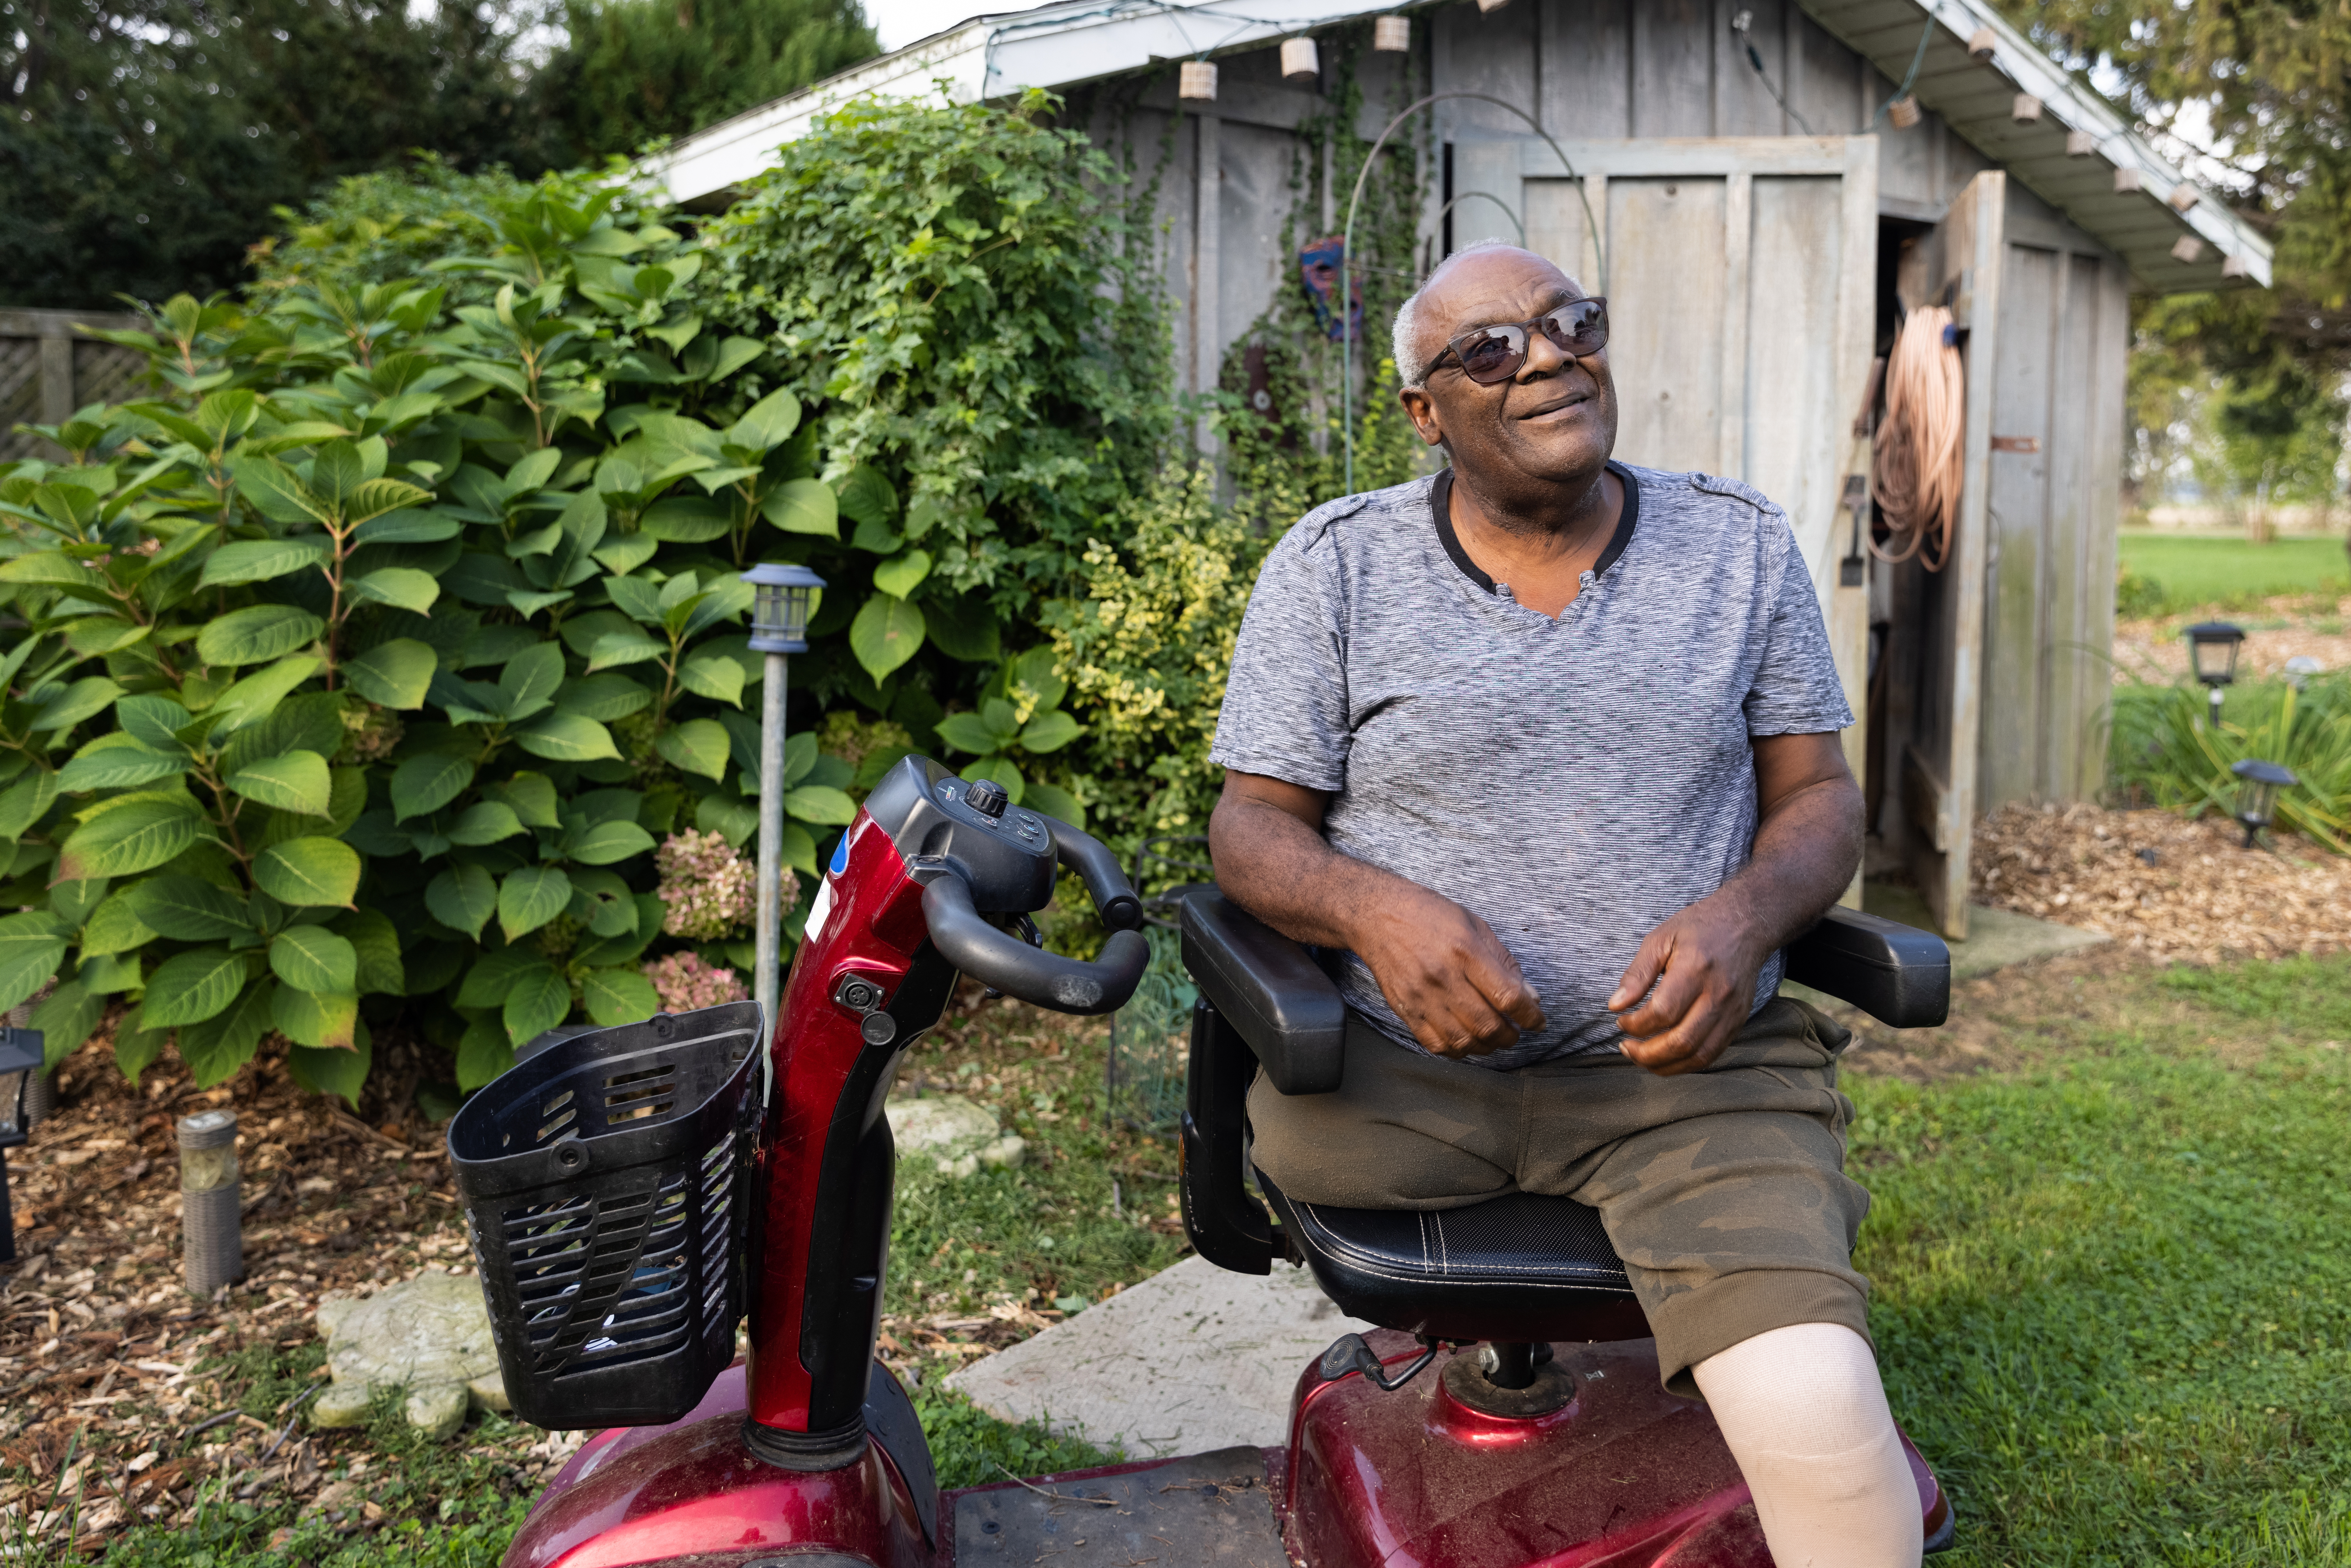 An older man sitting in a motorized scooter enjoying the sunshine in his garden.